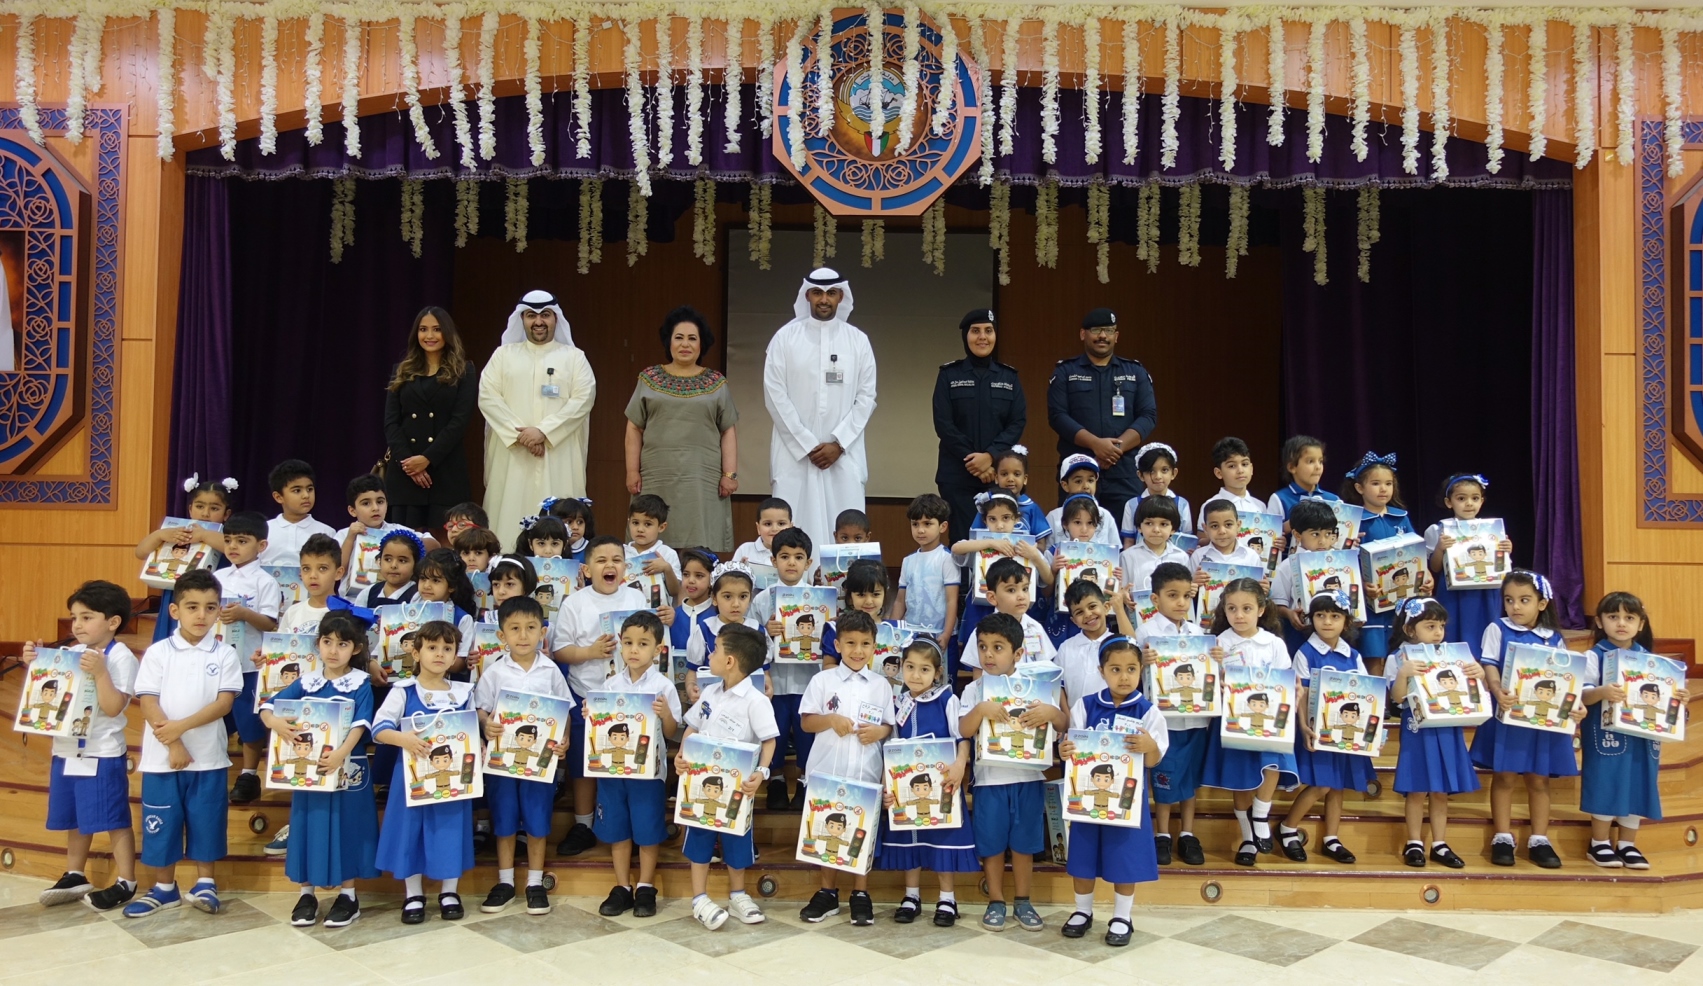 Zain joins students in welcoming new school year